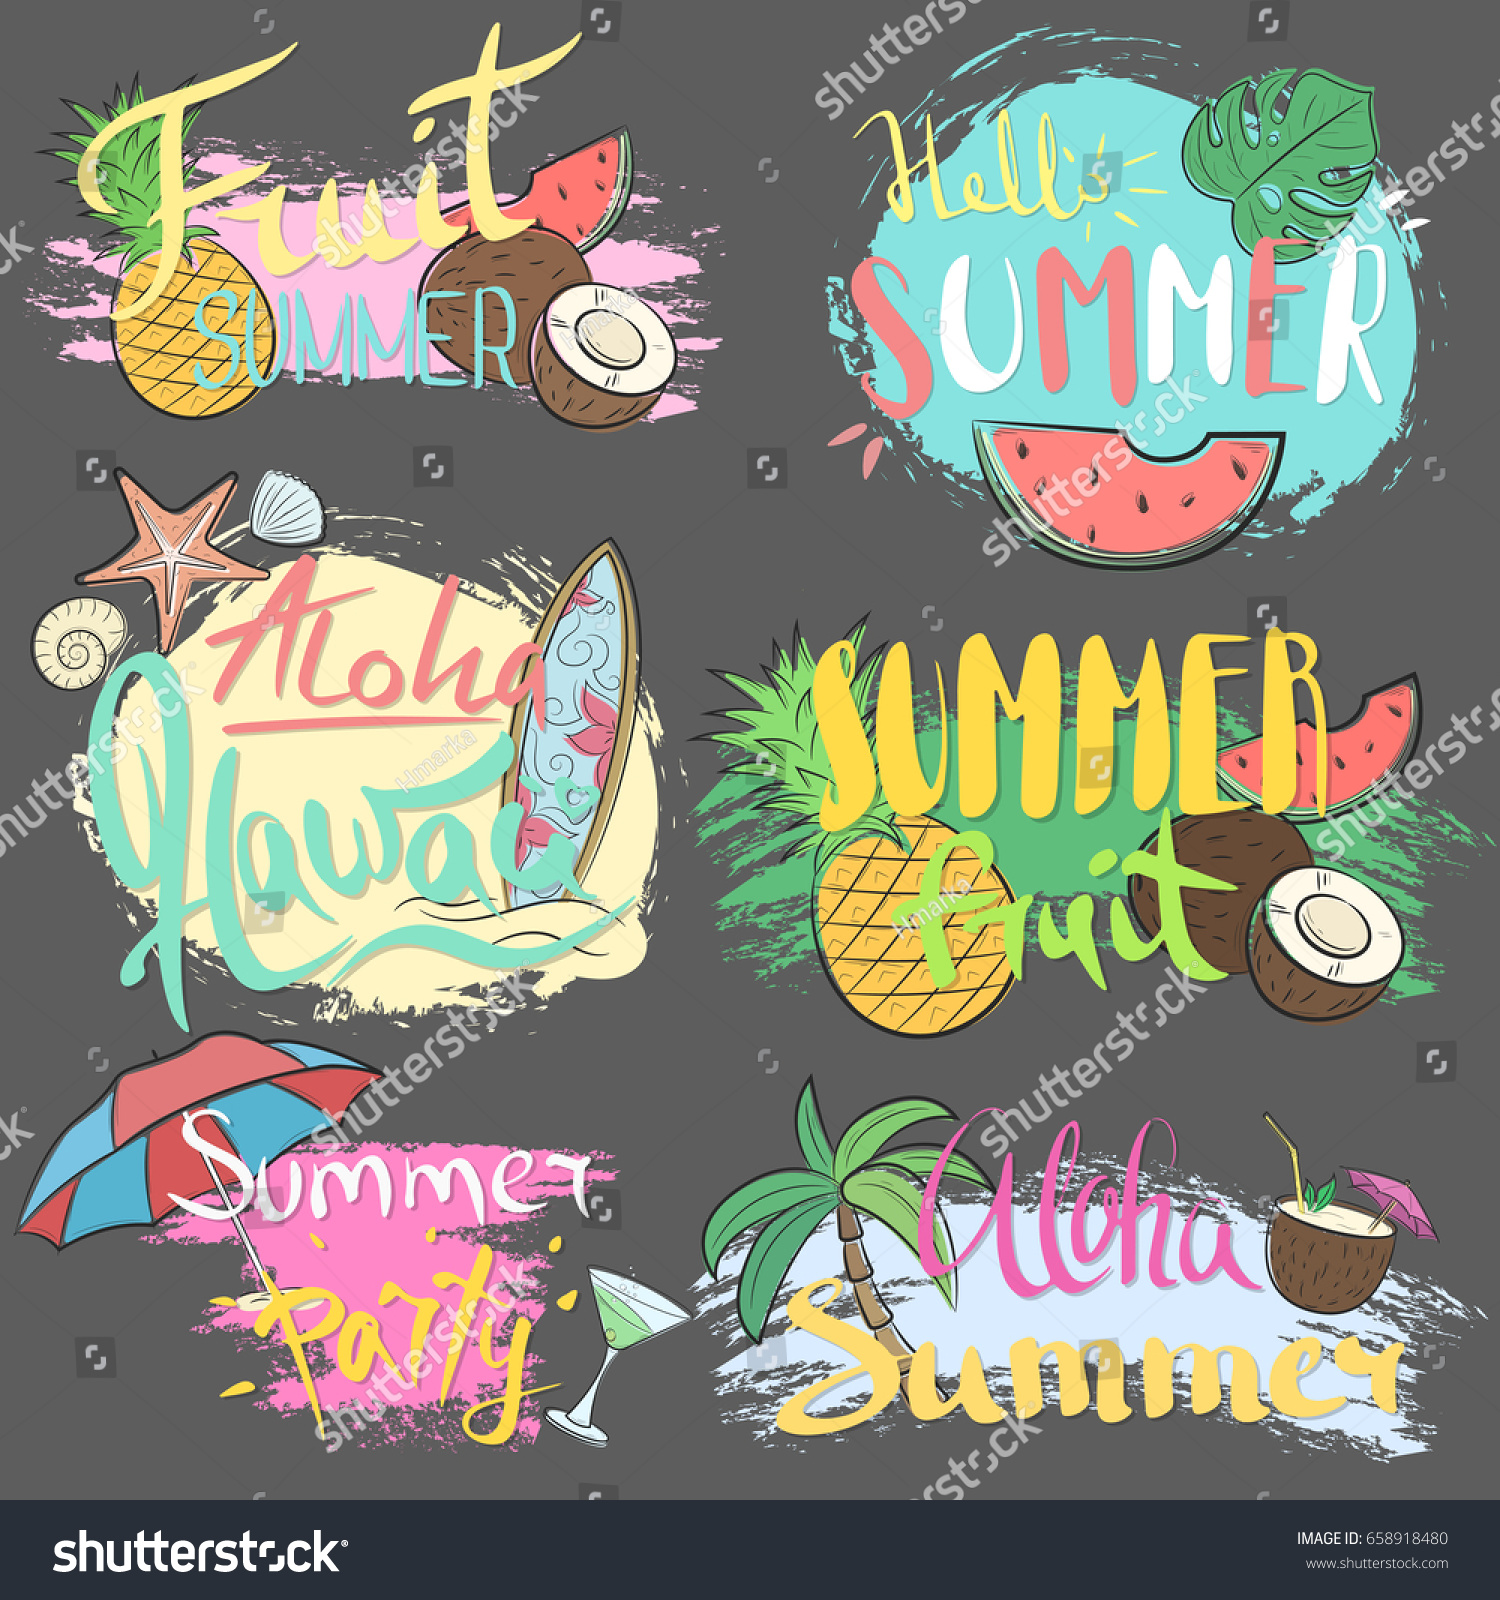 Vector hand-drawn lettering with illustrations of leaves of palm trees, surfing, cocktails, etc. Summer labels, logos, hand drawn tags and elements set for summer holiday #658918480